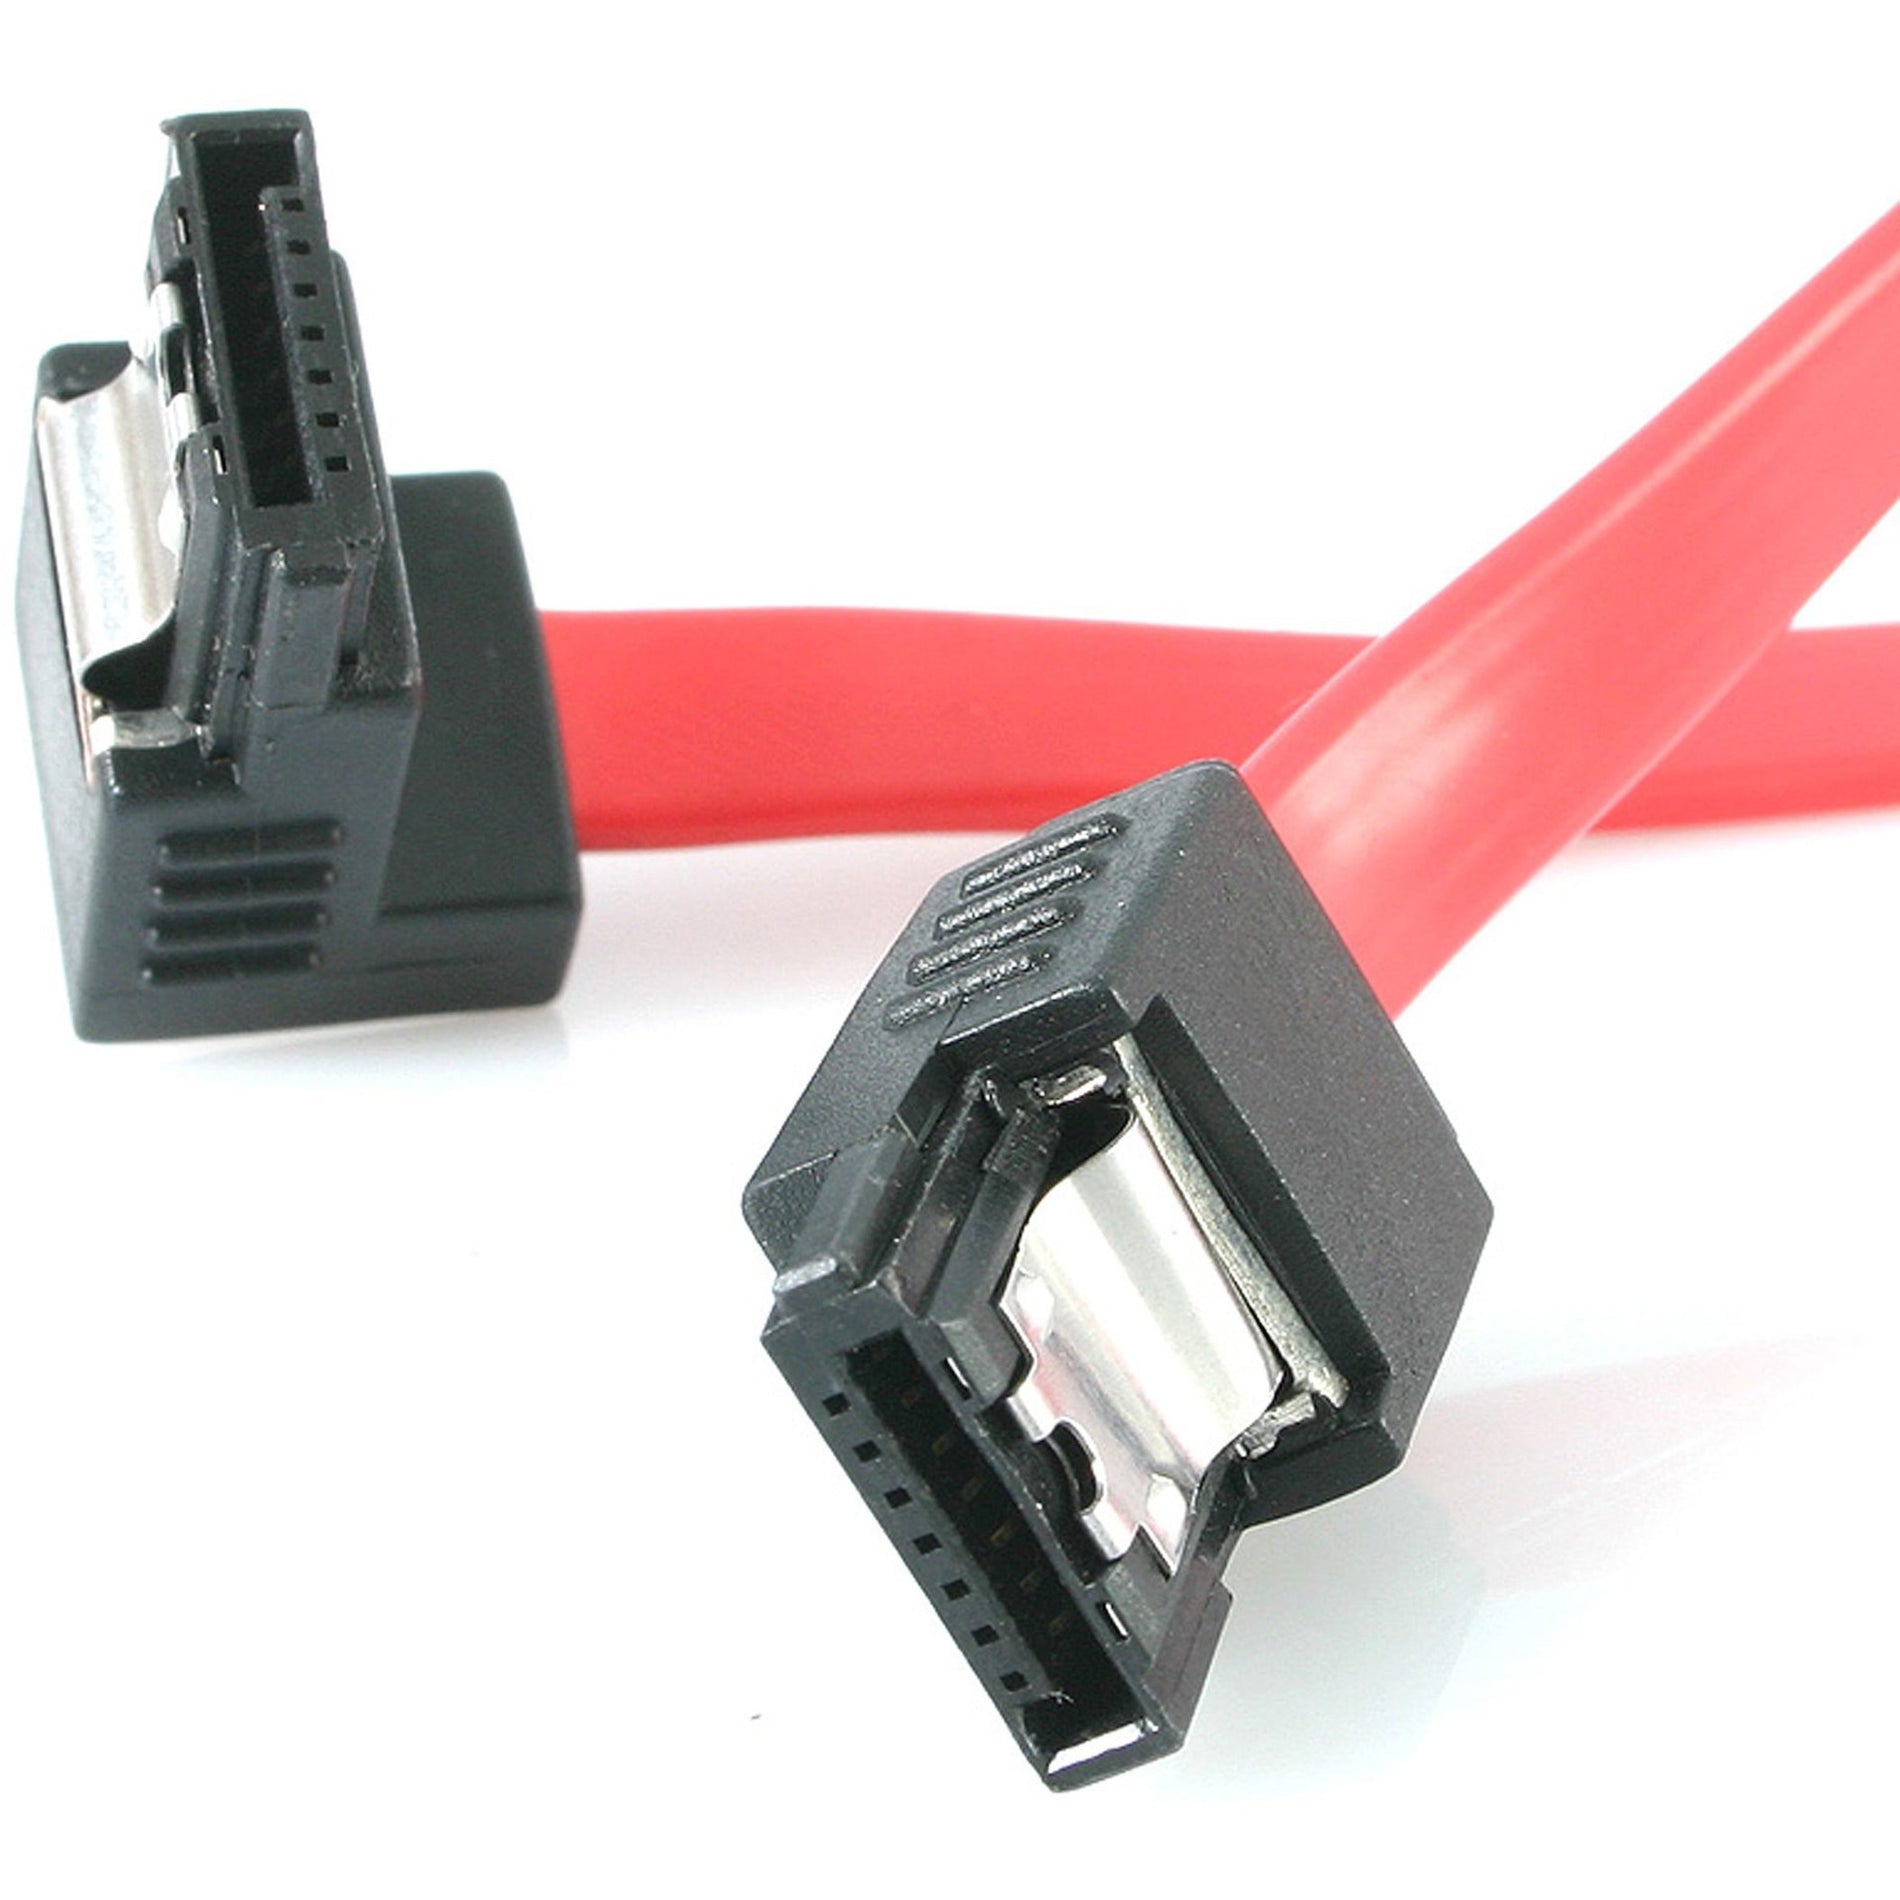 StarTech.com LSATA12RA1 12in Latching SATA to Right Angle SATA Serial ATA Cable, Flexible, 6 Gbit/s Data Transfer Rate